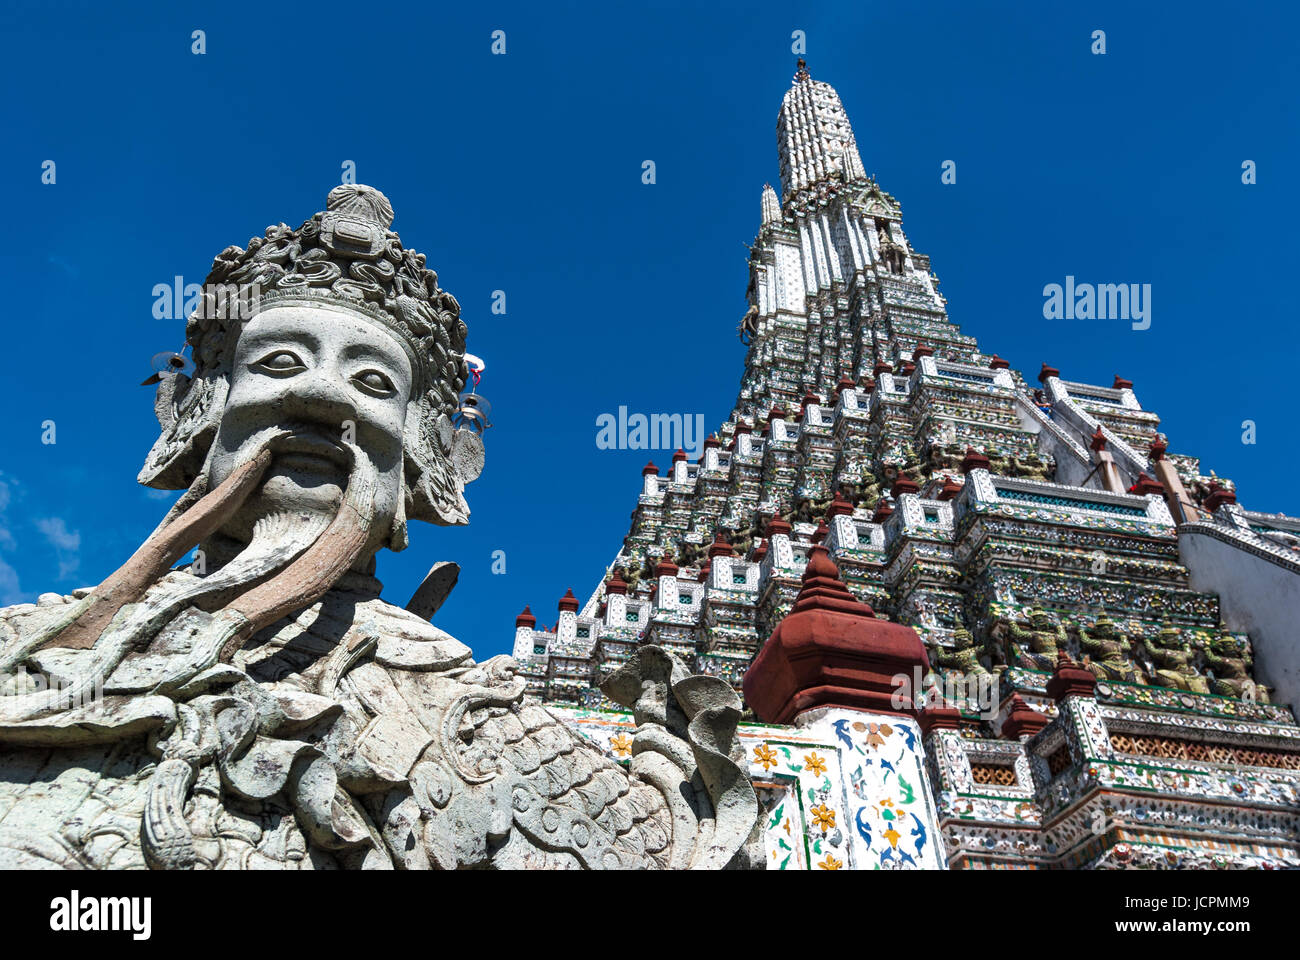 The sculpture of a smiling chinese man with the prang style Wat Arun buddhist temple in the city center of Bangkok, Thailand. Stock Photo